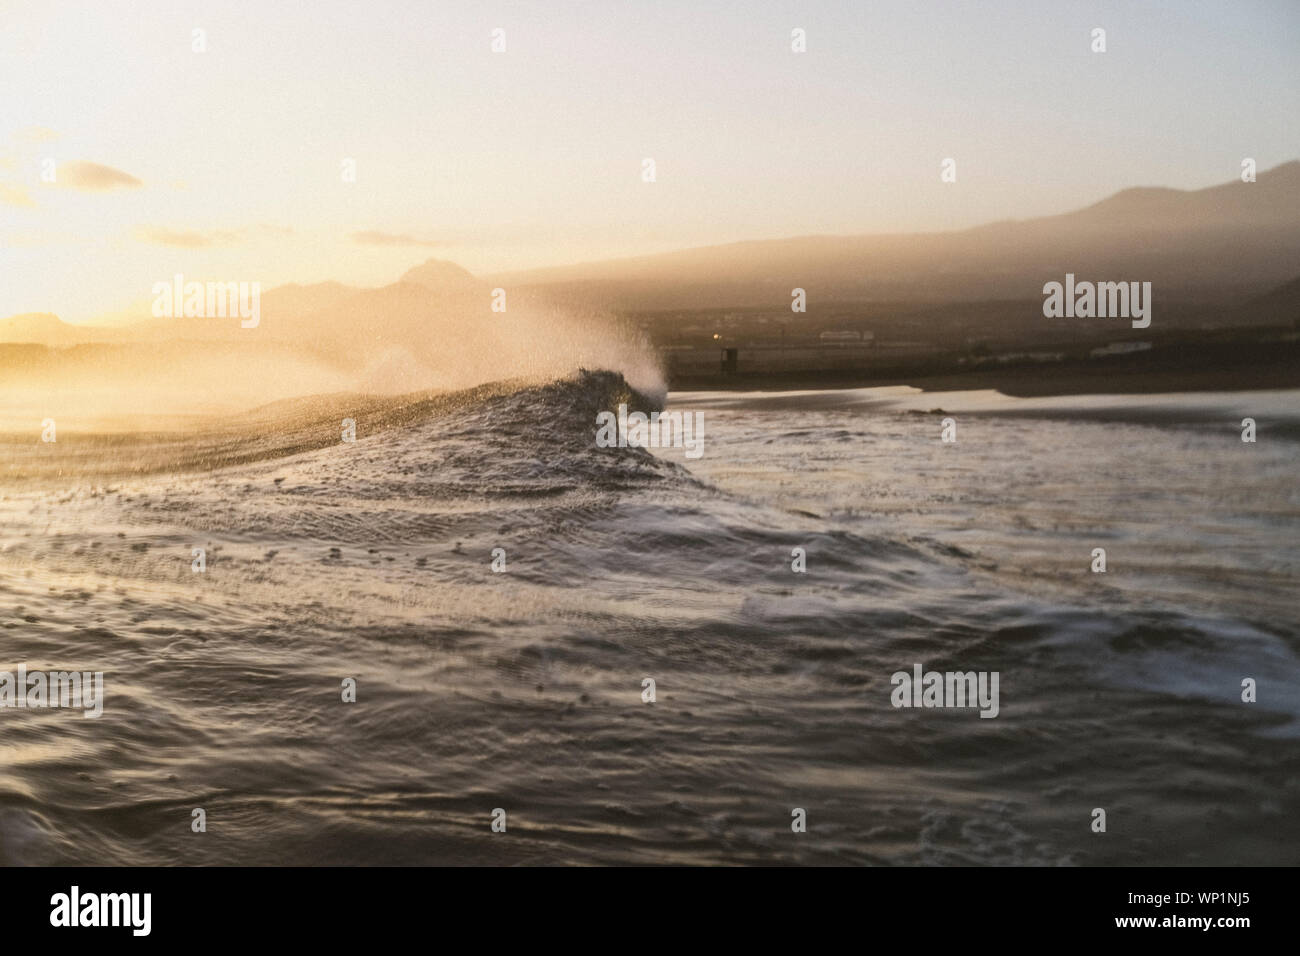 Moody beach scene of a wave breaking with shoreline in background Stock Photo